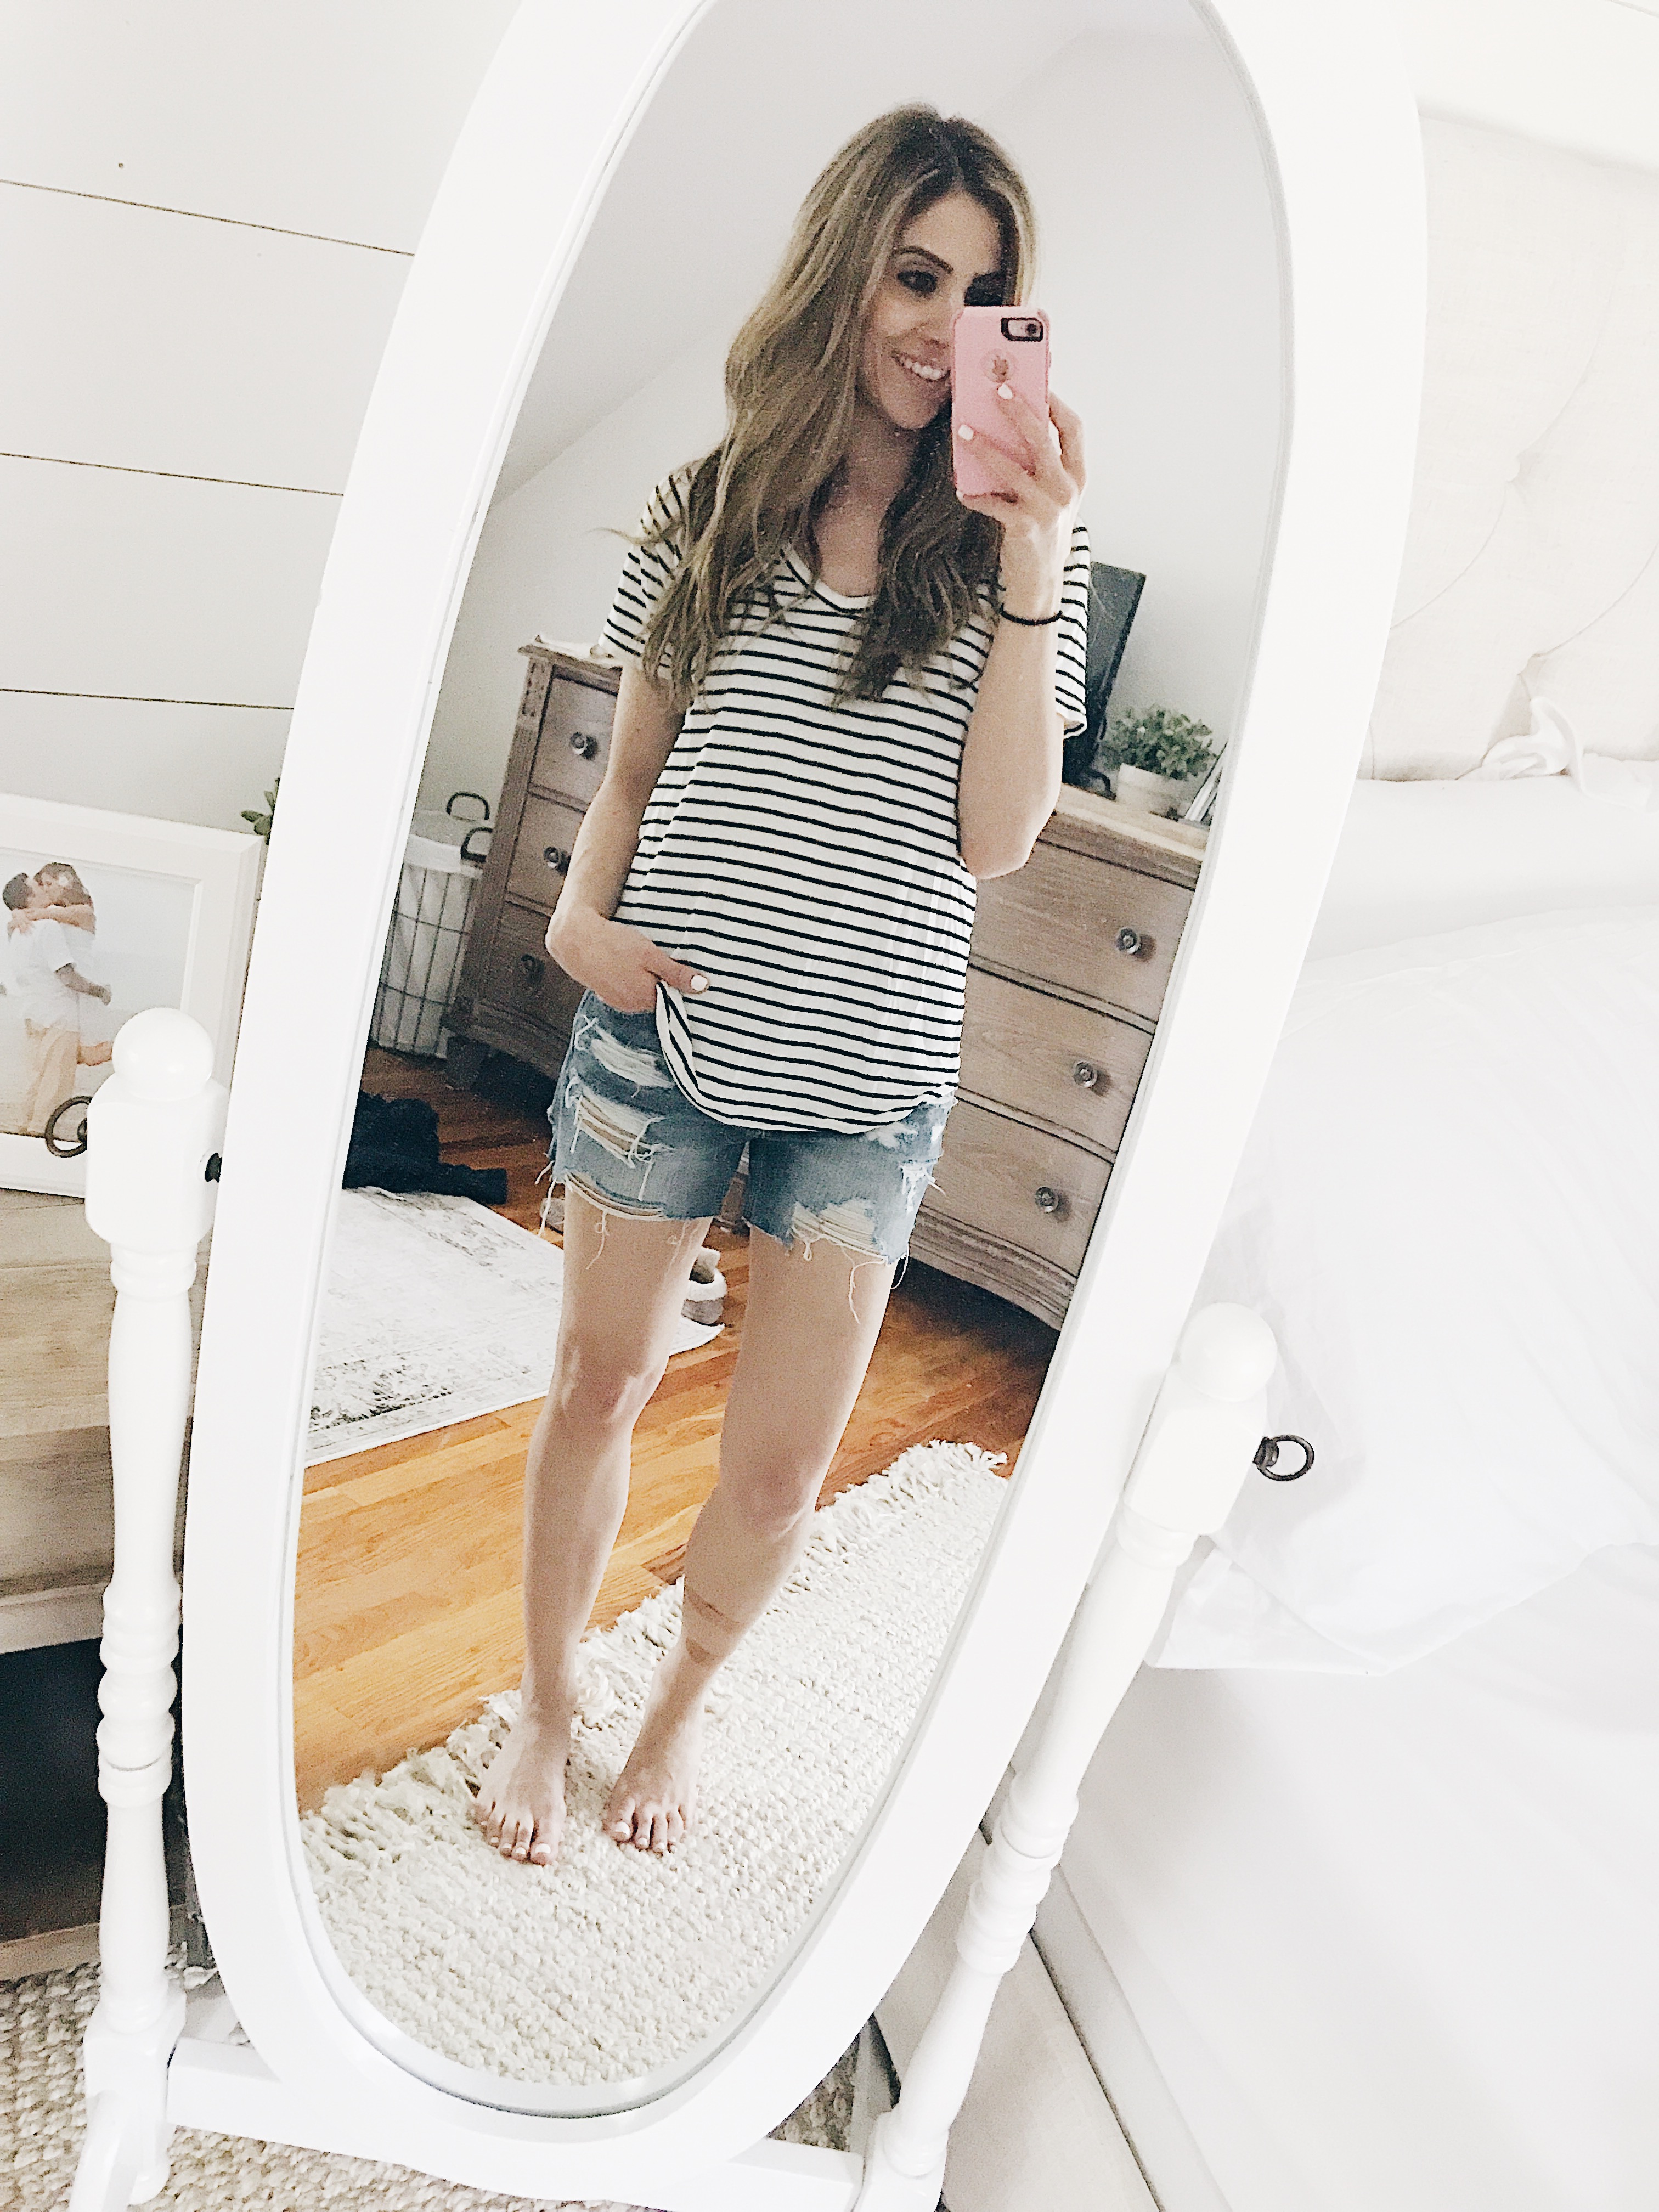 In need of a few Summer style staples? Check out my favorite Summer Mom Wardrobe Essentials, + few tips and tricks that I look for while shopping around.